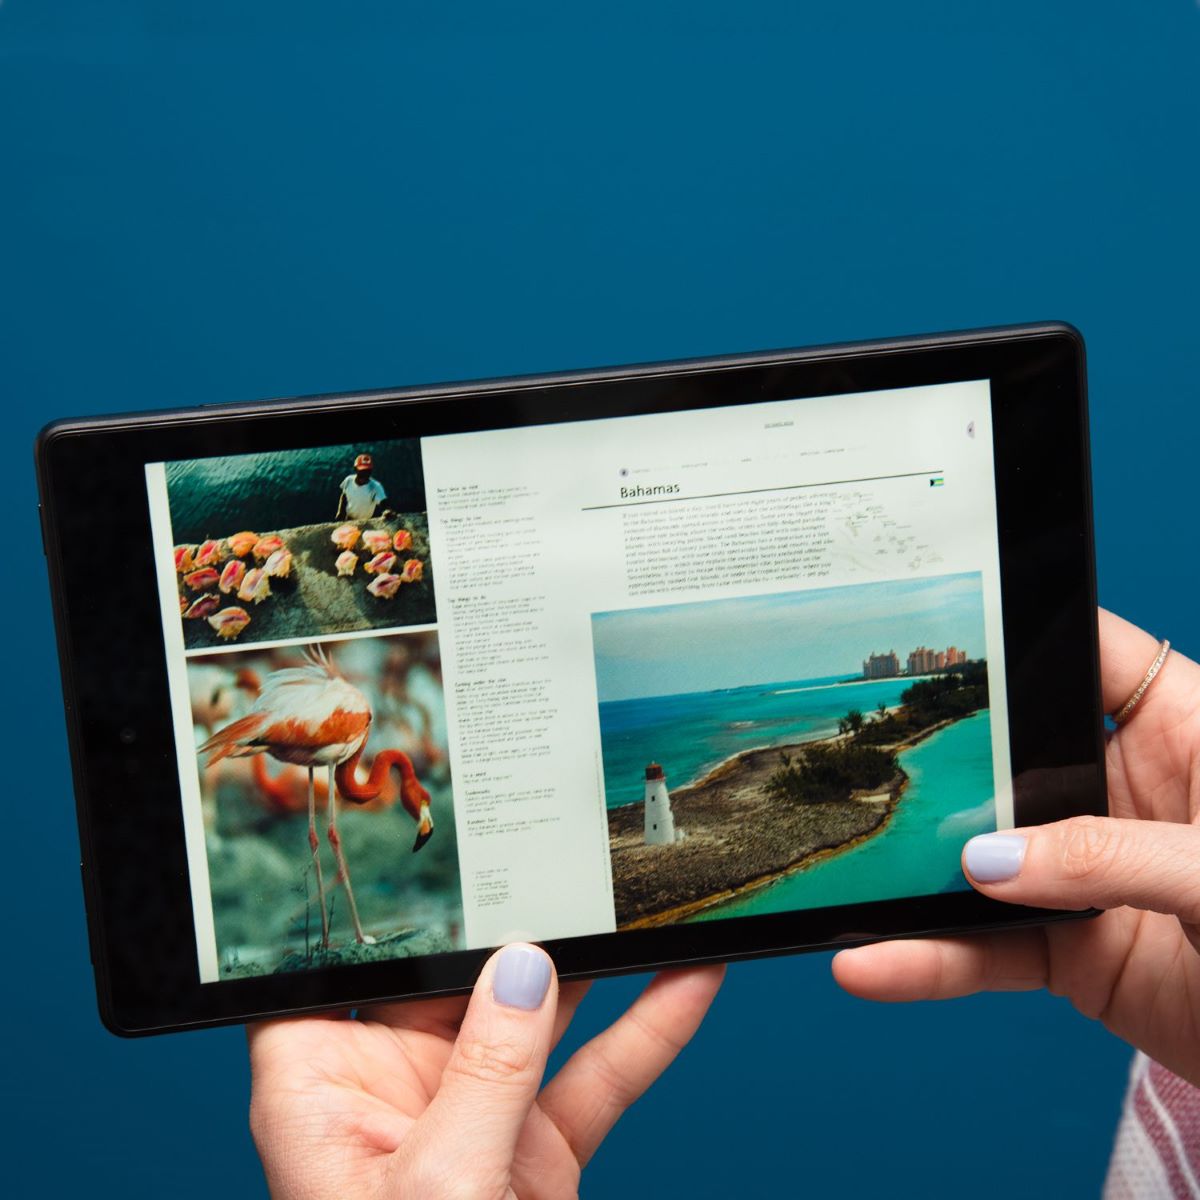 What Video Files Does Kindle Fire Support